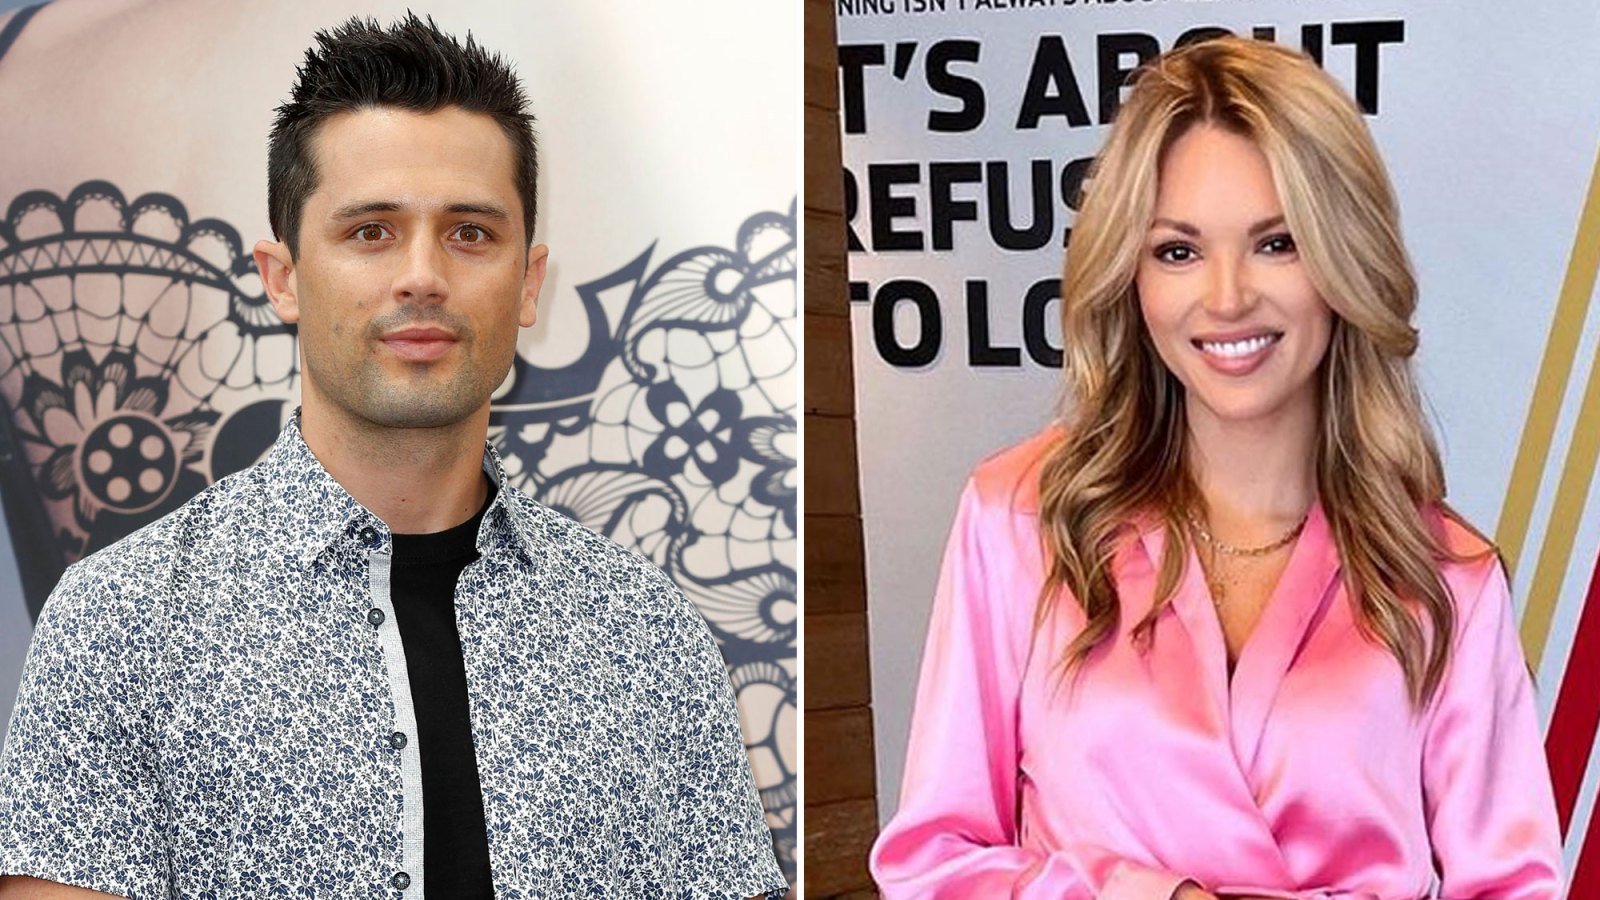 Stephen Colletti Reveals He Is Dating NASCAR Reporter Alex Weaver in Cuddled Up Golden Hour Photo